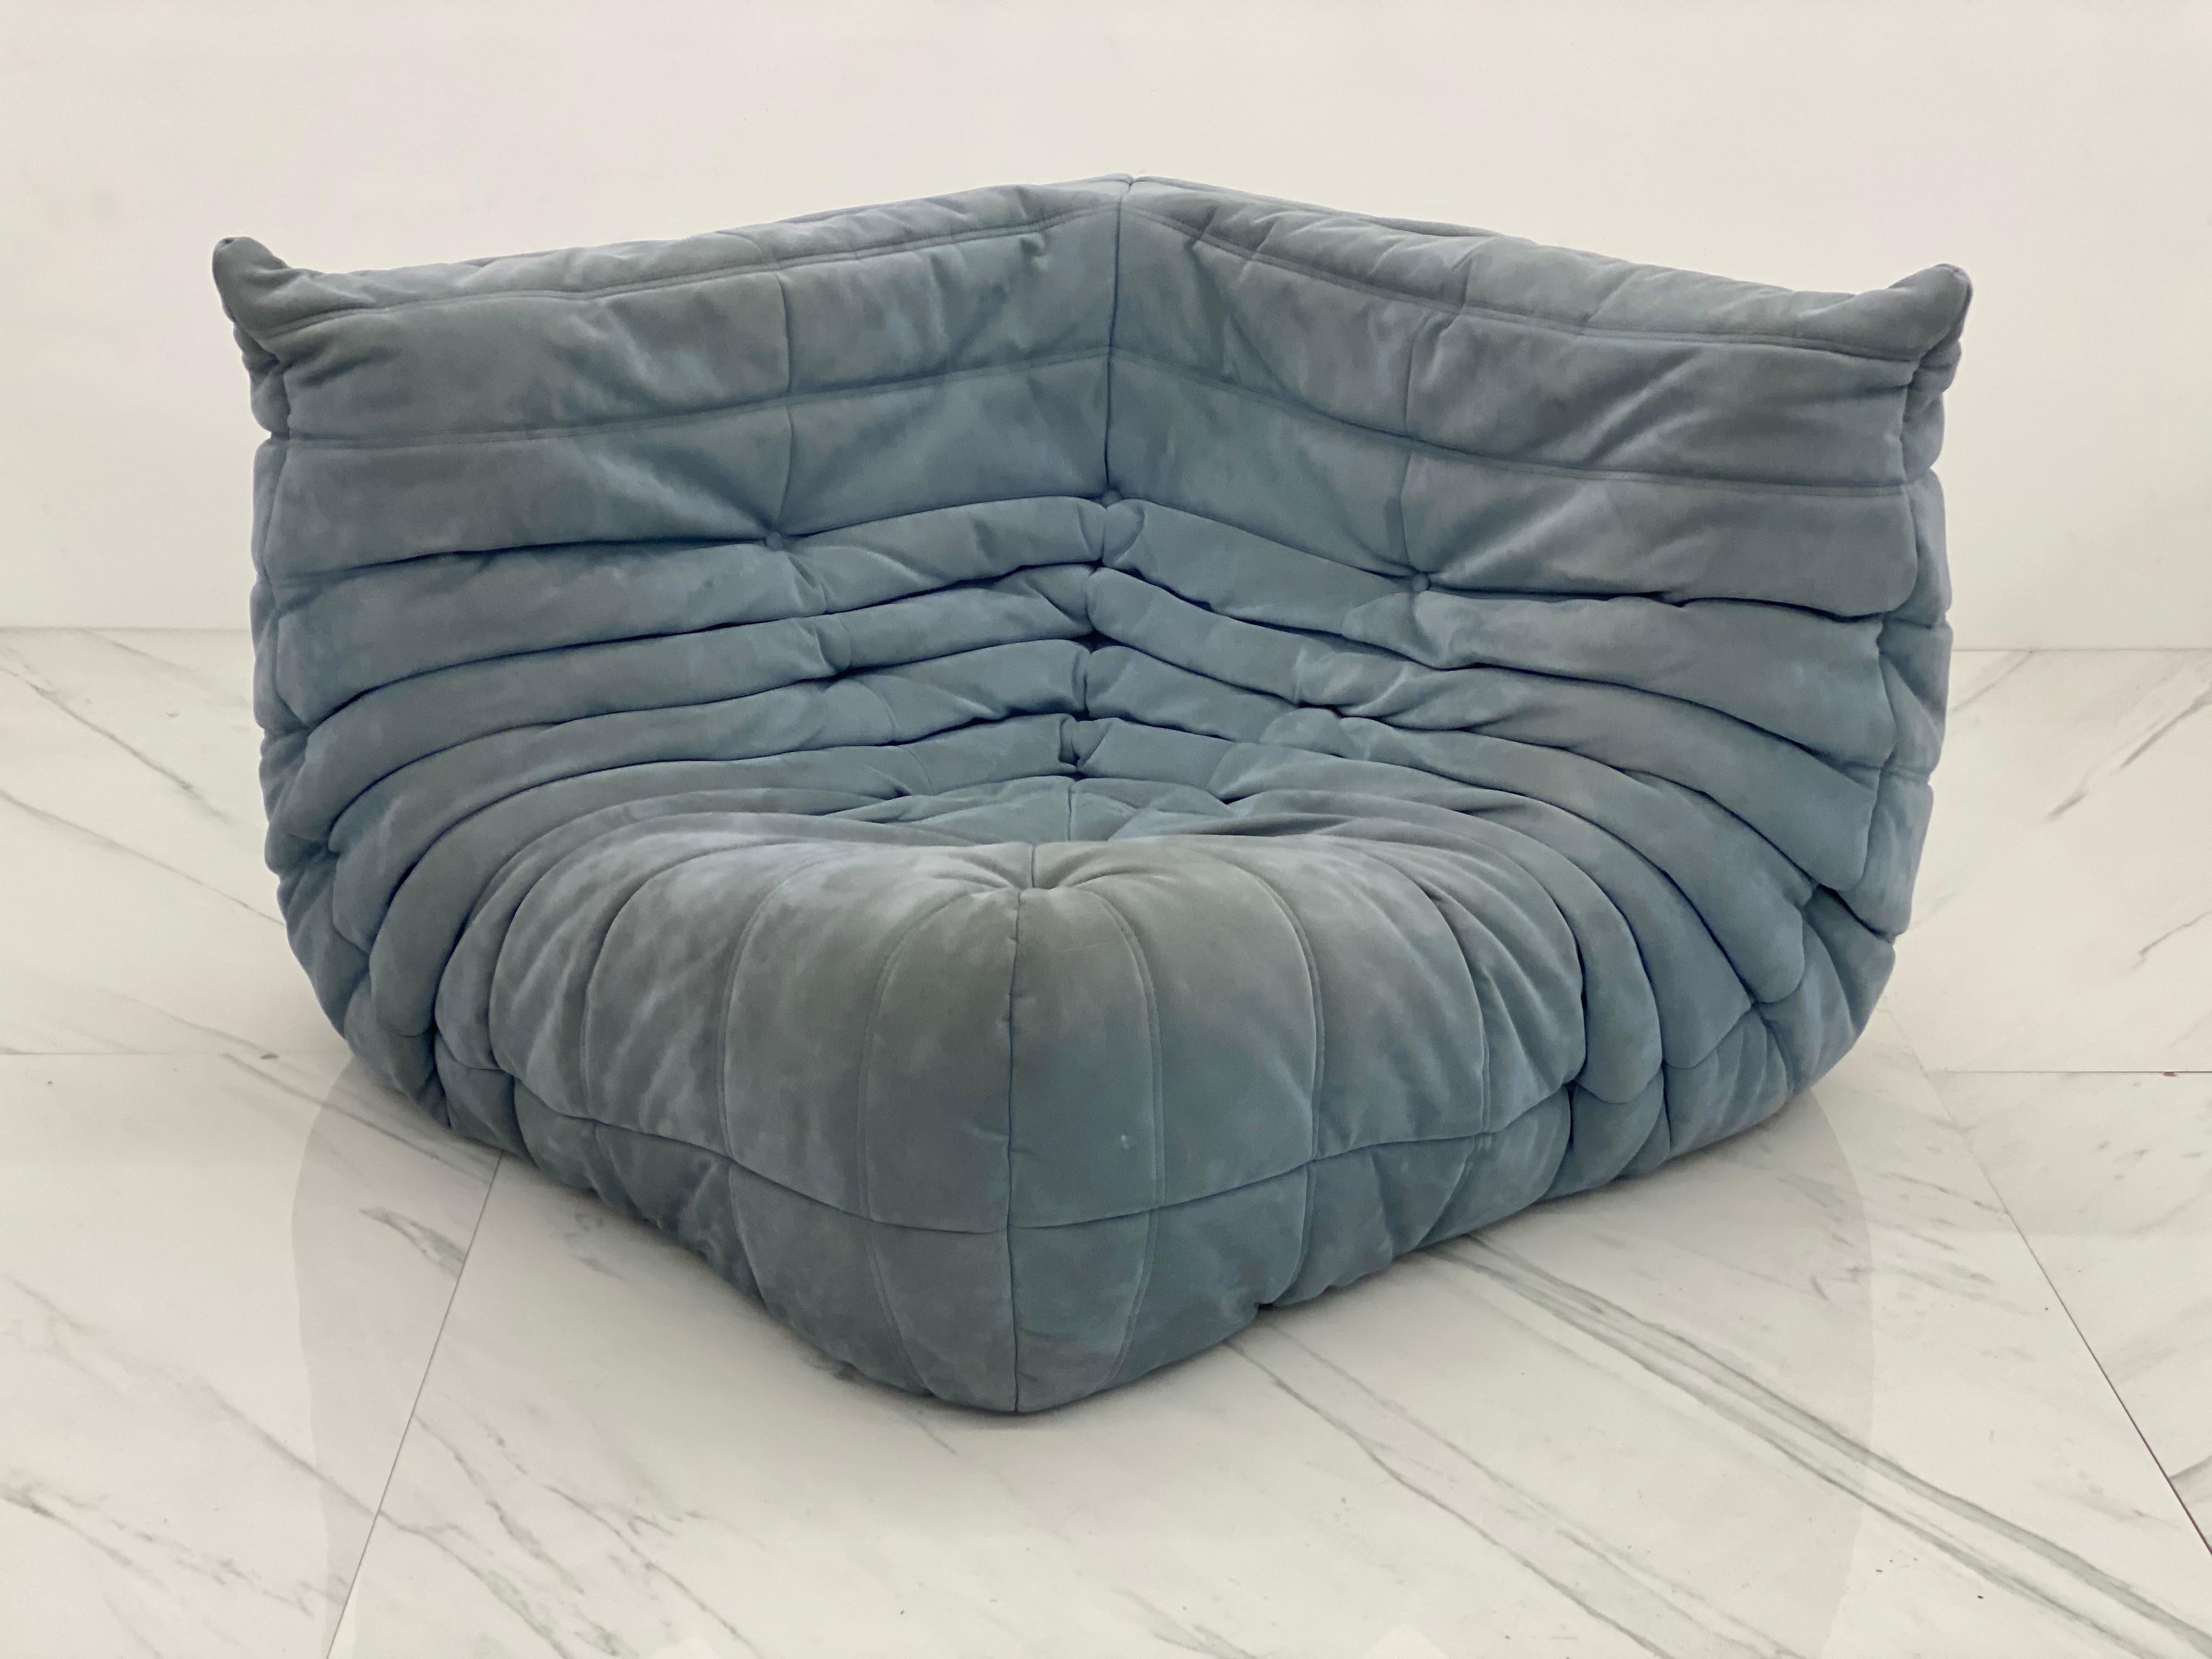 Baby Blue 'Togo' Sectional Sofa by Michel Ducaroy for Ligne Roset, Signed 2